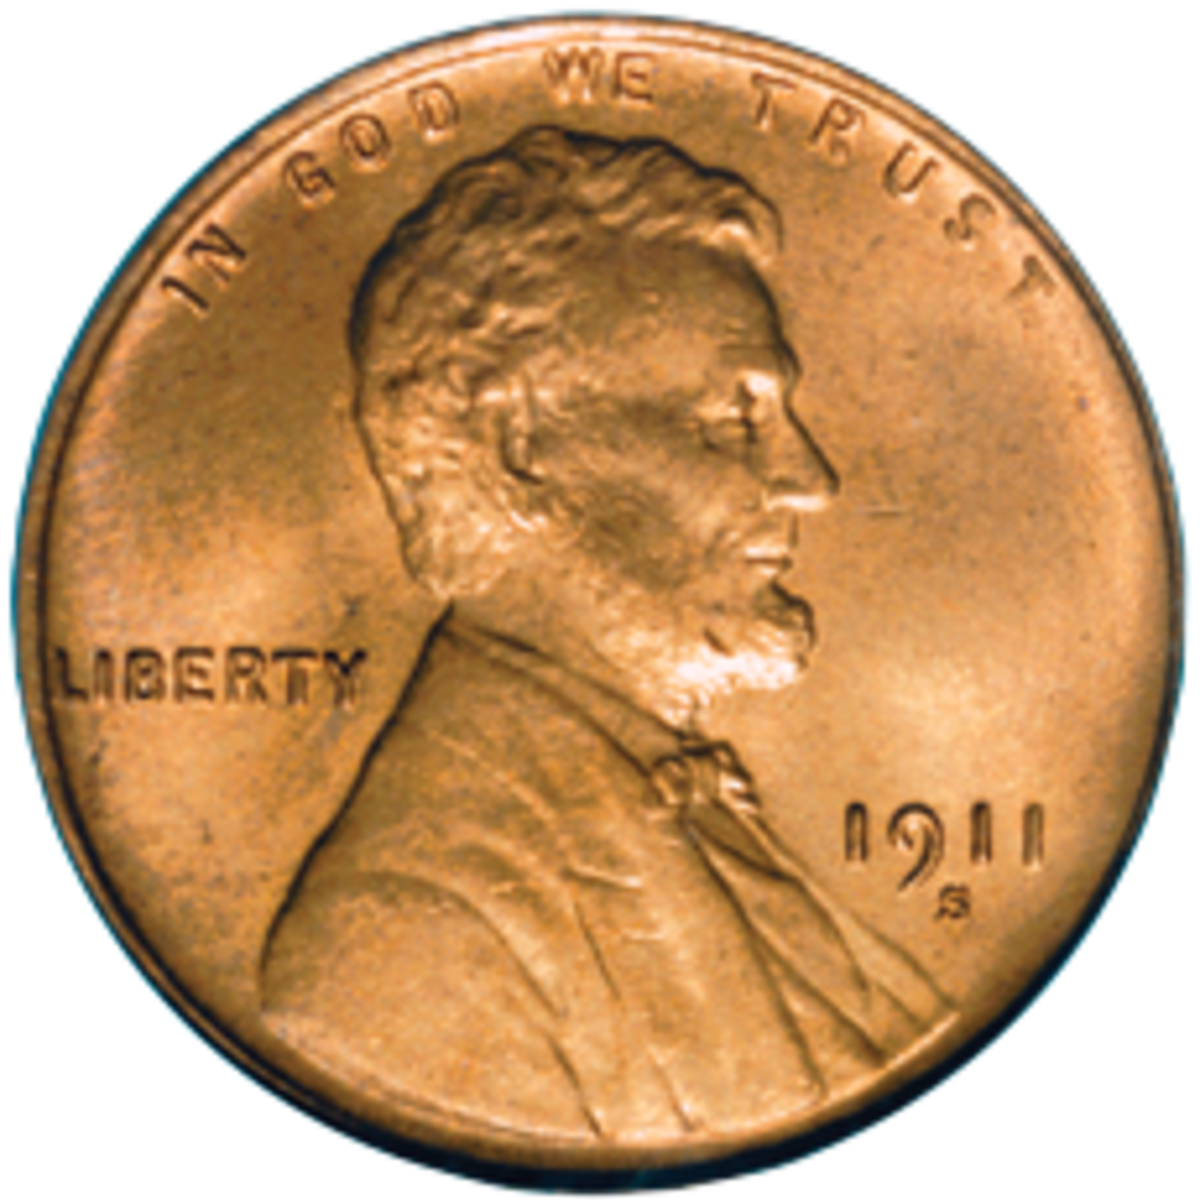 Looking Through Unsearched Rolls of Wheat Cents - Numismatic News